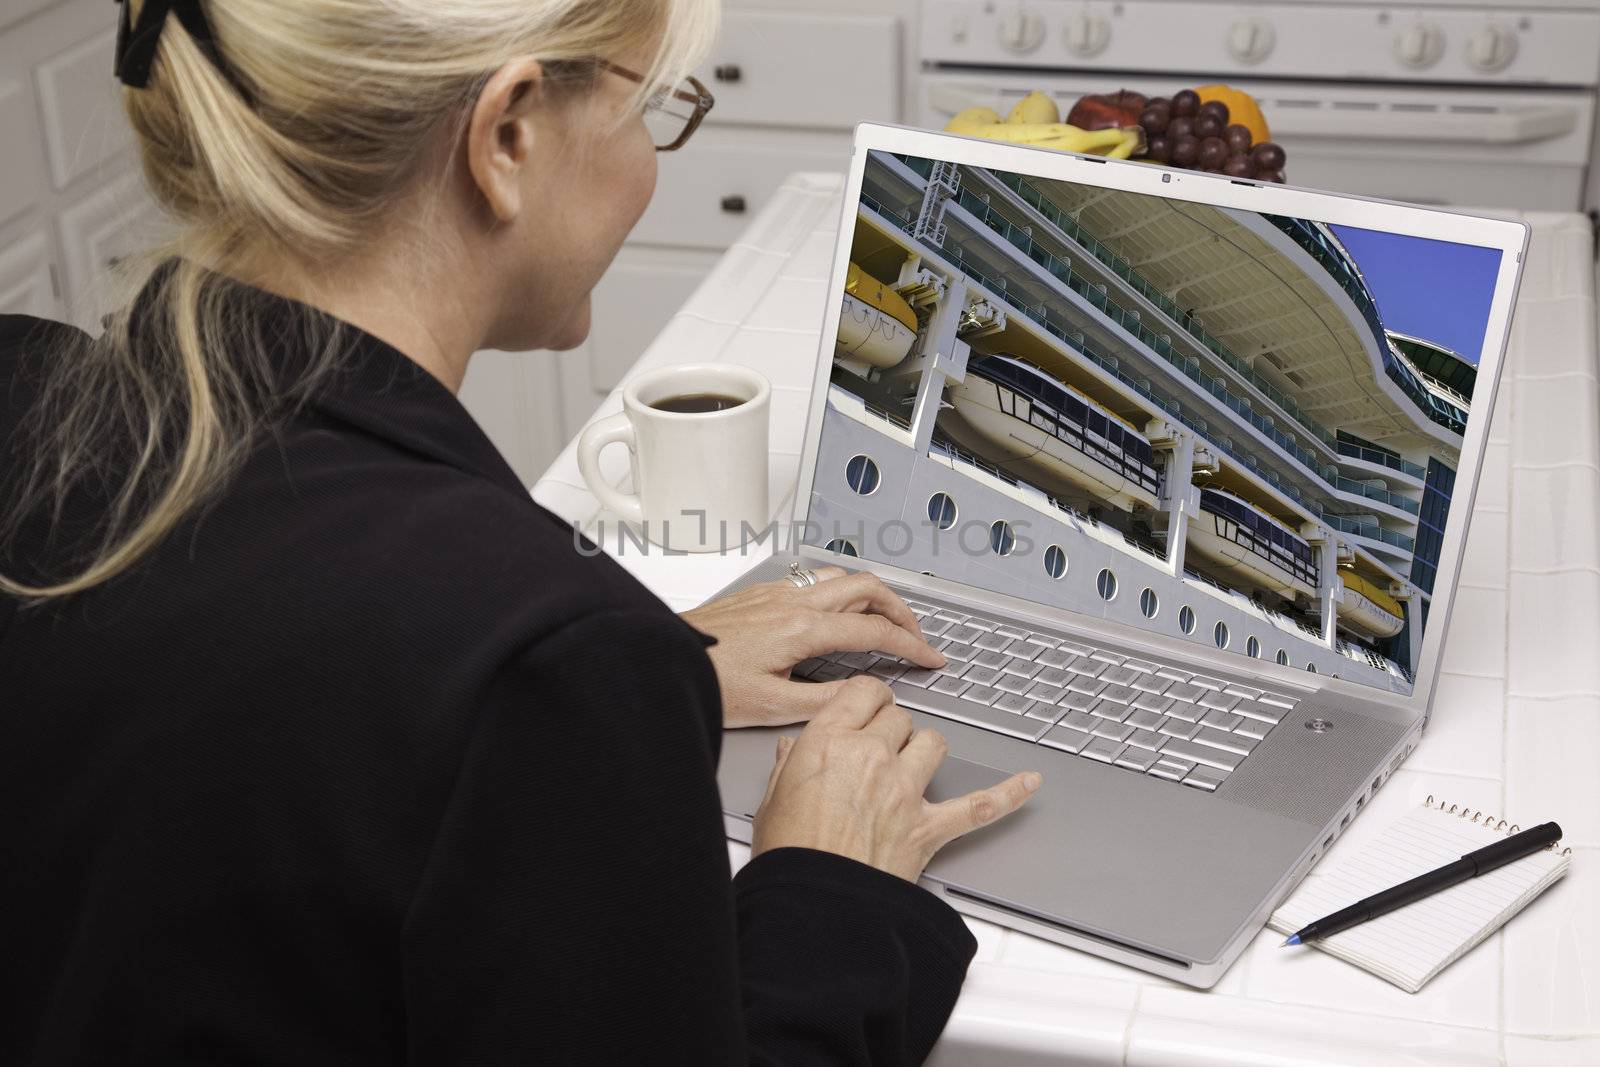 Woman In Kitchen Using Laptop- Cruise vacation by Feverpitched